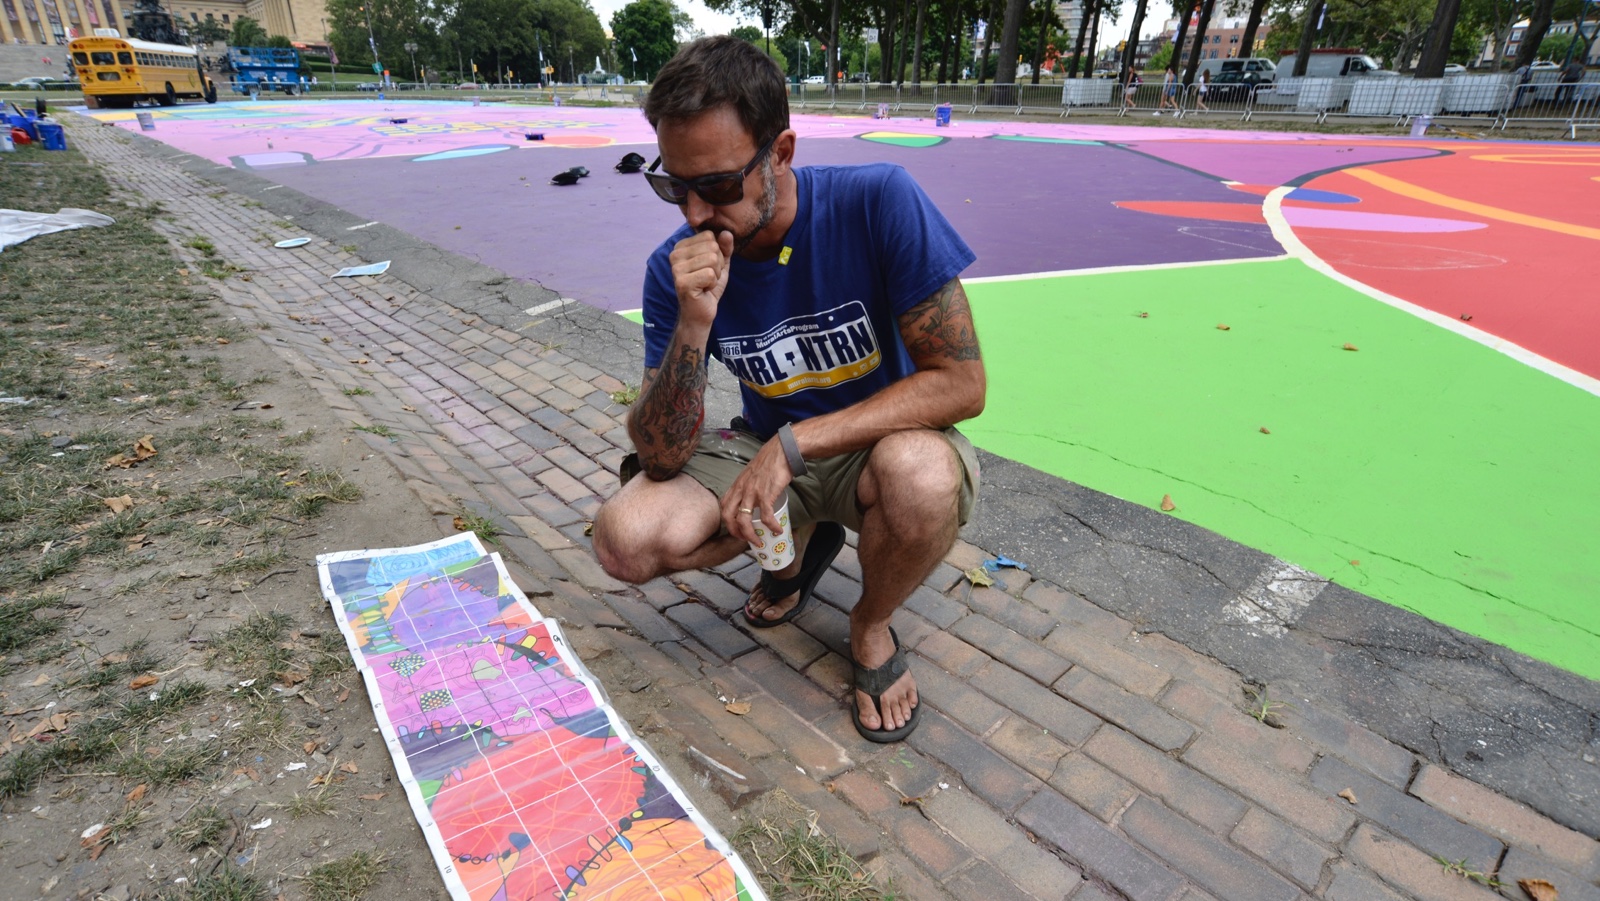 Lead muralist Brad Carney checks the design of his 25,000-square-foot mural 'Rhythm & Hues', that is currently being painted at Eakins Oval. (Bastiaan Slabbers for NewsWorks)